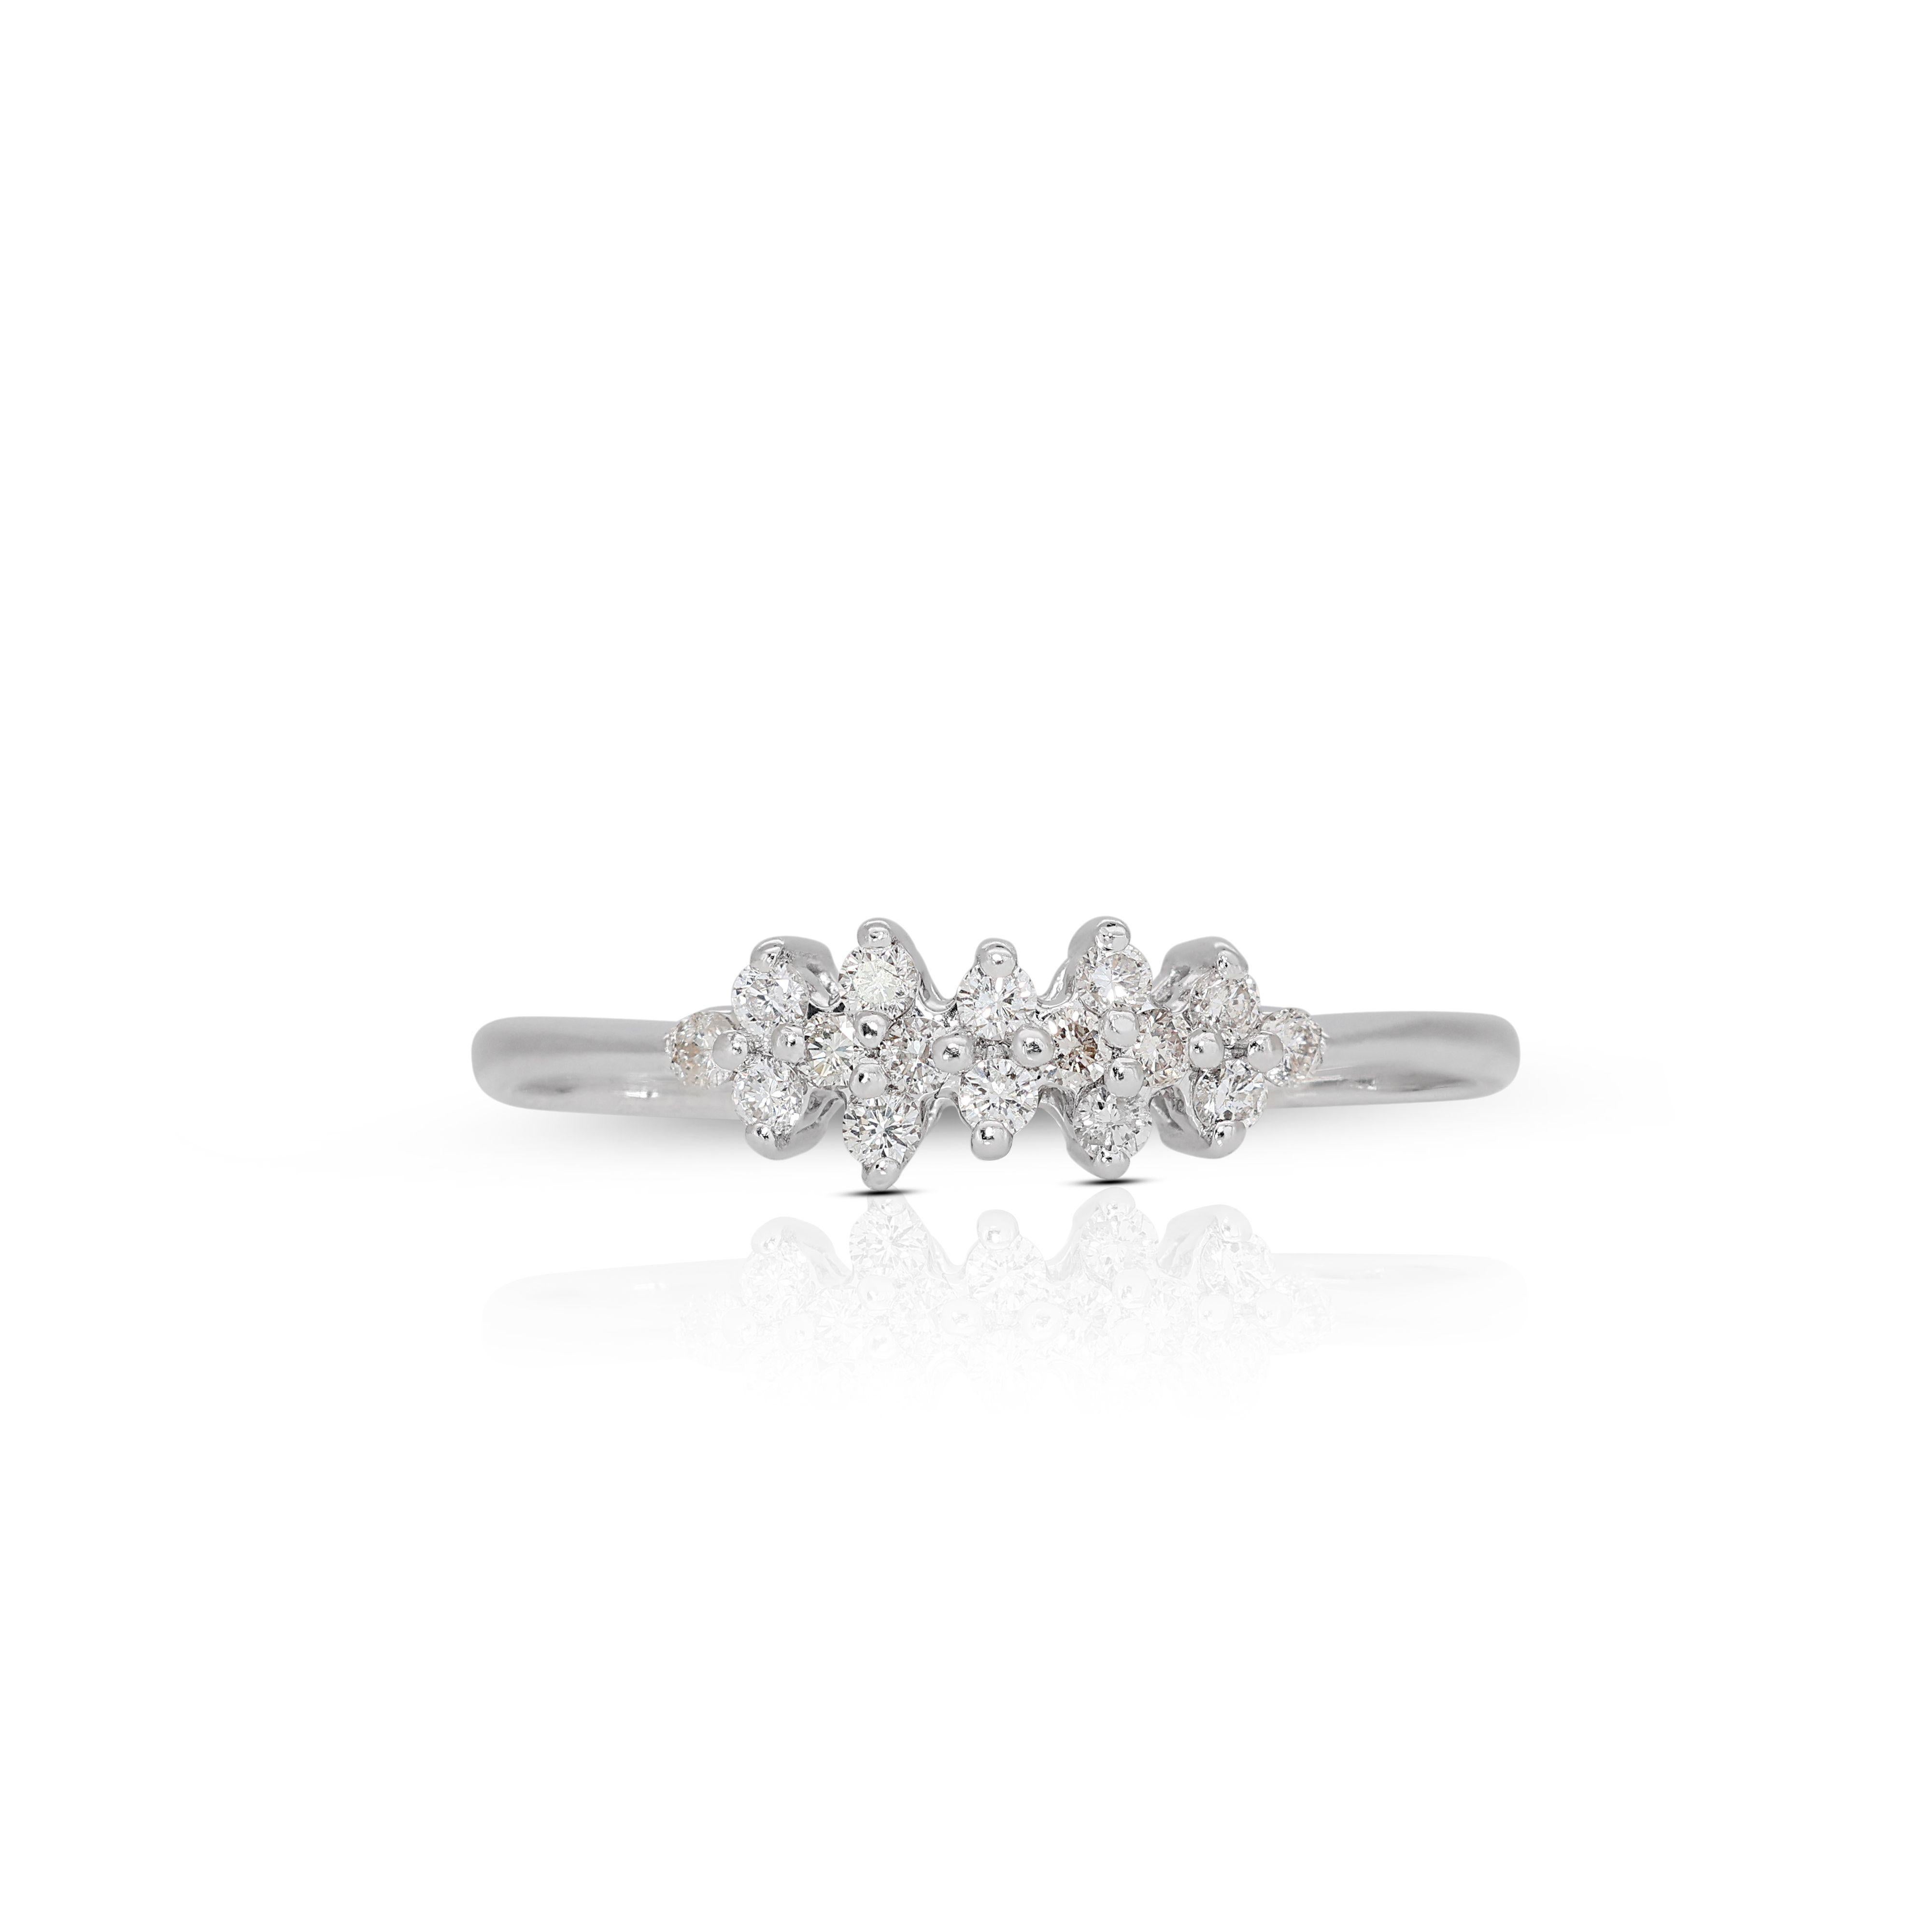 This Exquisite 0.20ct Diamond Ring in 18K White Gold is a versatile and meaningful accessory, suitable for various occasions, from engagements to formal events or simply as a symbol of timeless elegance. Its design complements a wide range of